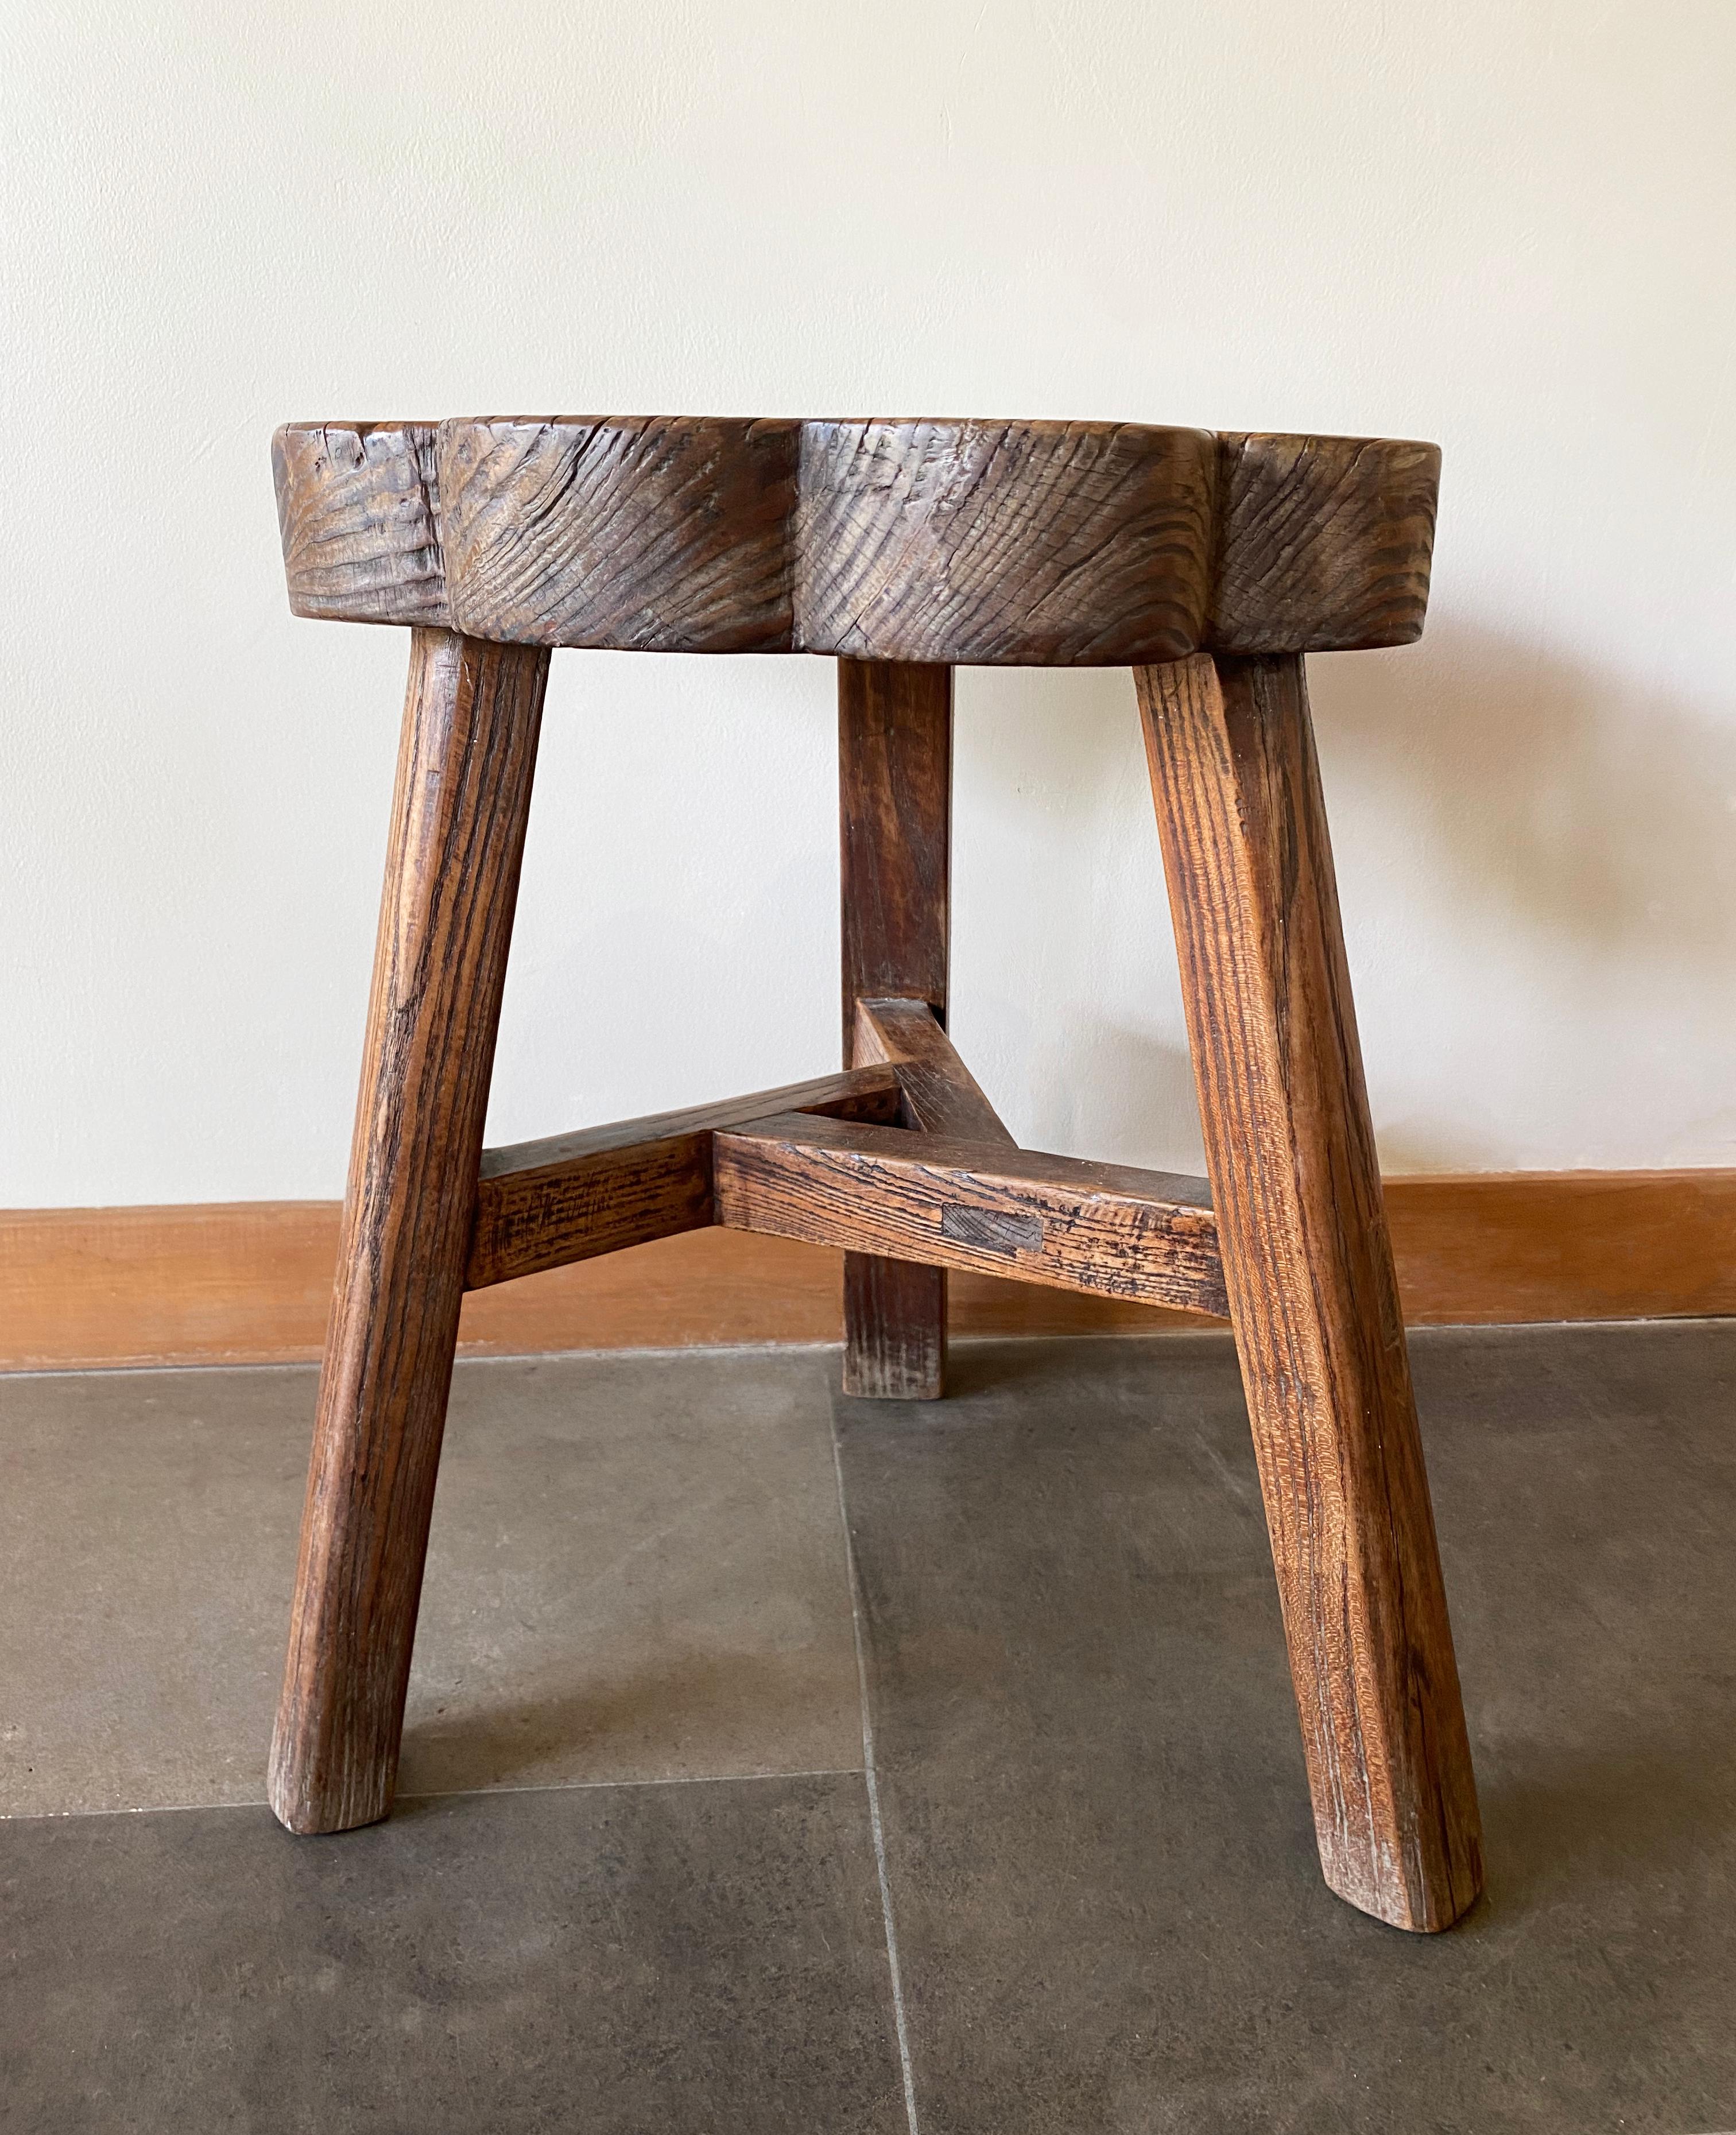 Other Antique Chinese Elm Wood Stool with Floral Wood Detailing, Early 20th Century